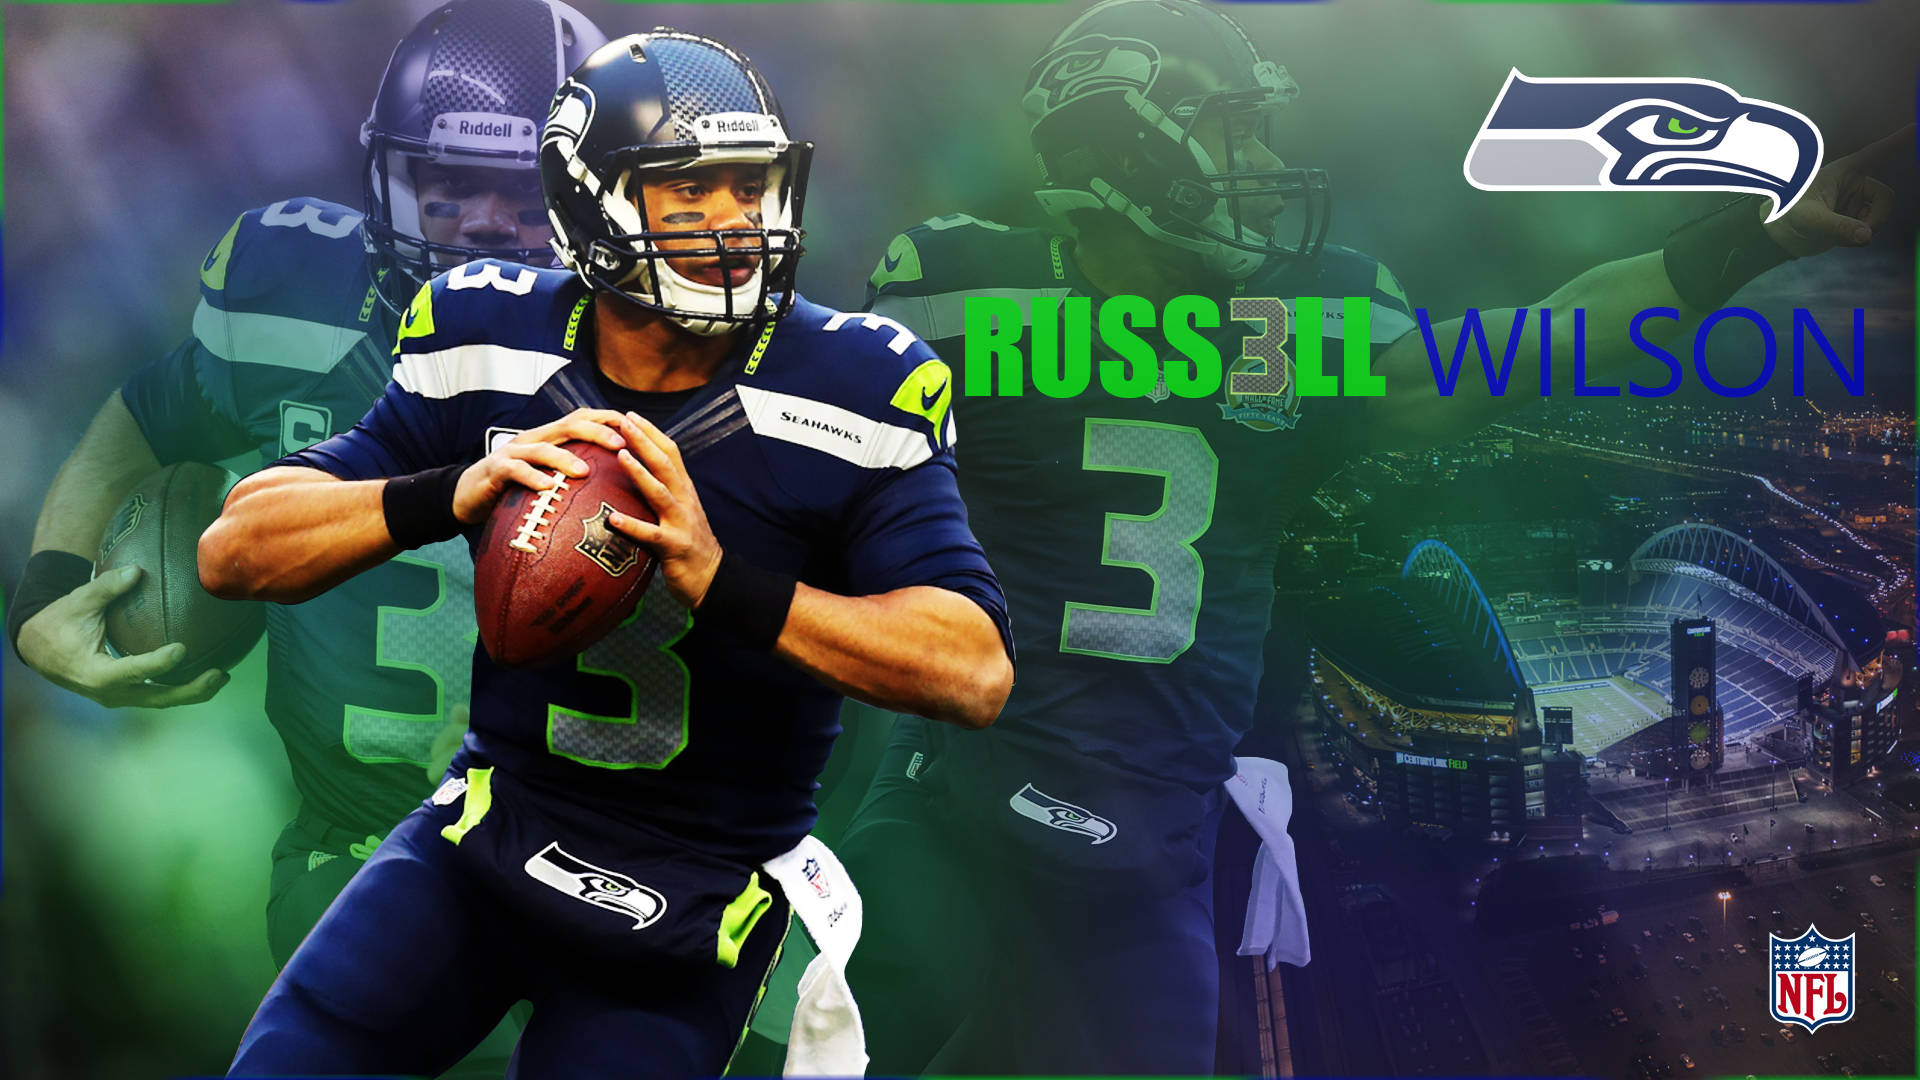 Russell Wilson Edit With Match Images Background